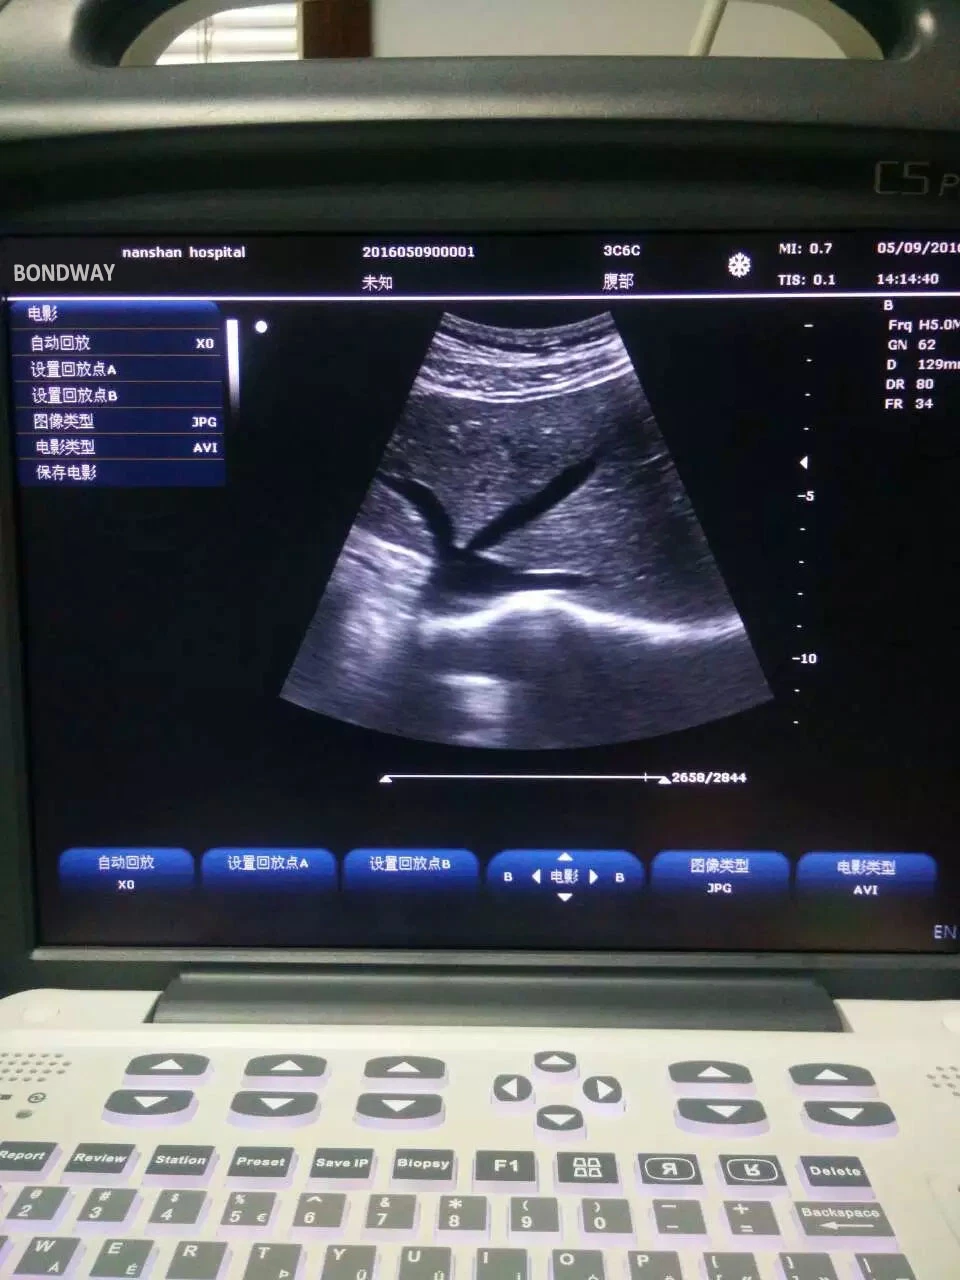 Factory Low Price Full Digital Portable Color Doppler Diagnostic Ultrasound Imaging System, with 12-1 Inch High-Resolution LCD, Medical Ultrasonic Machine